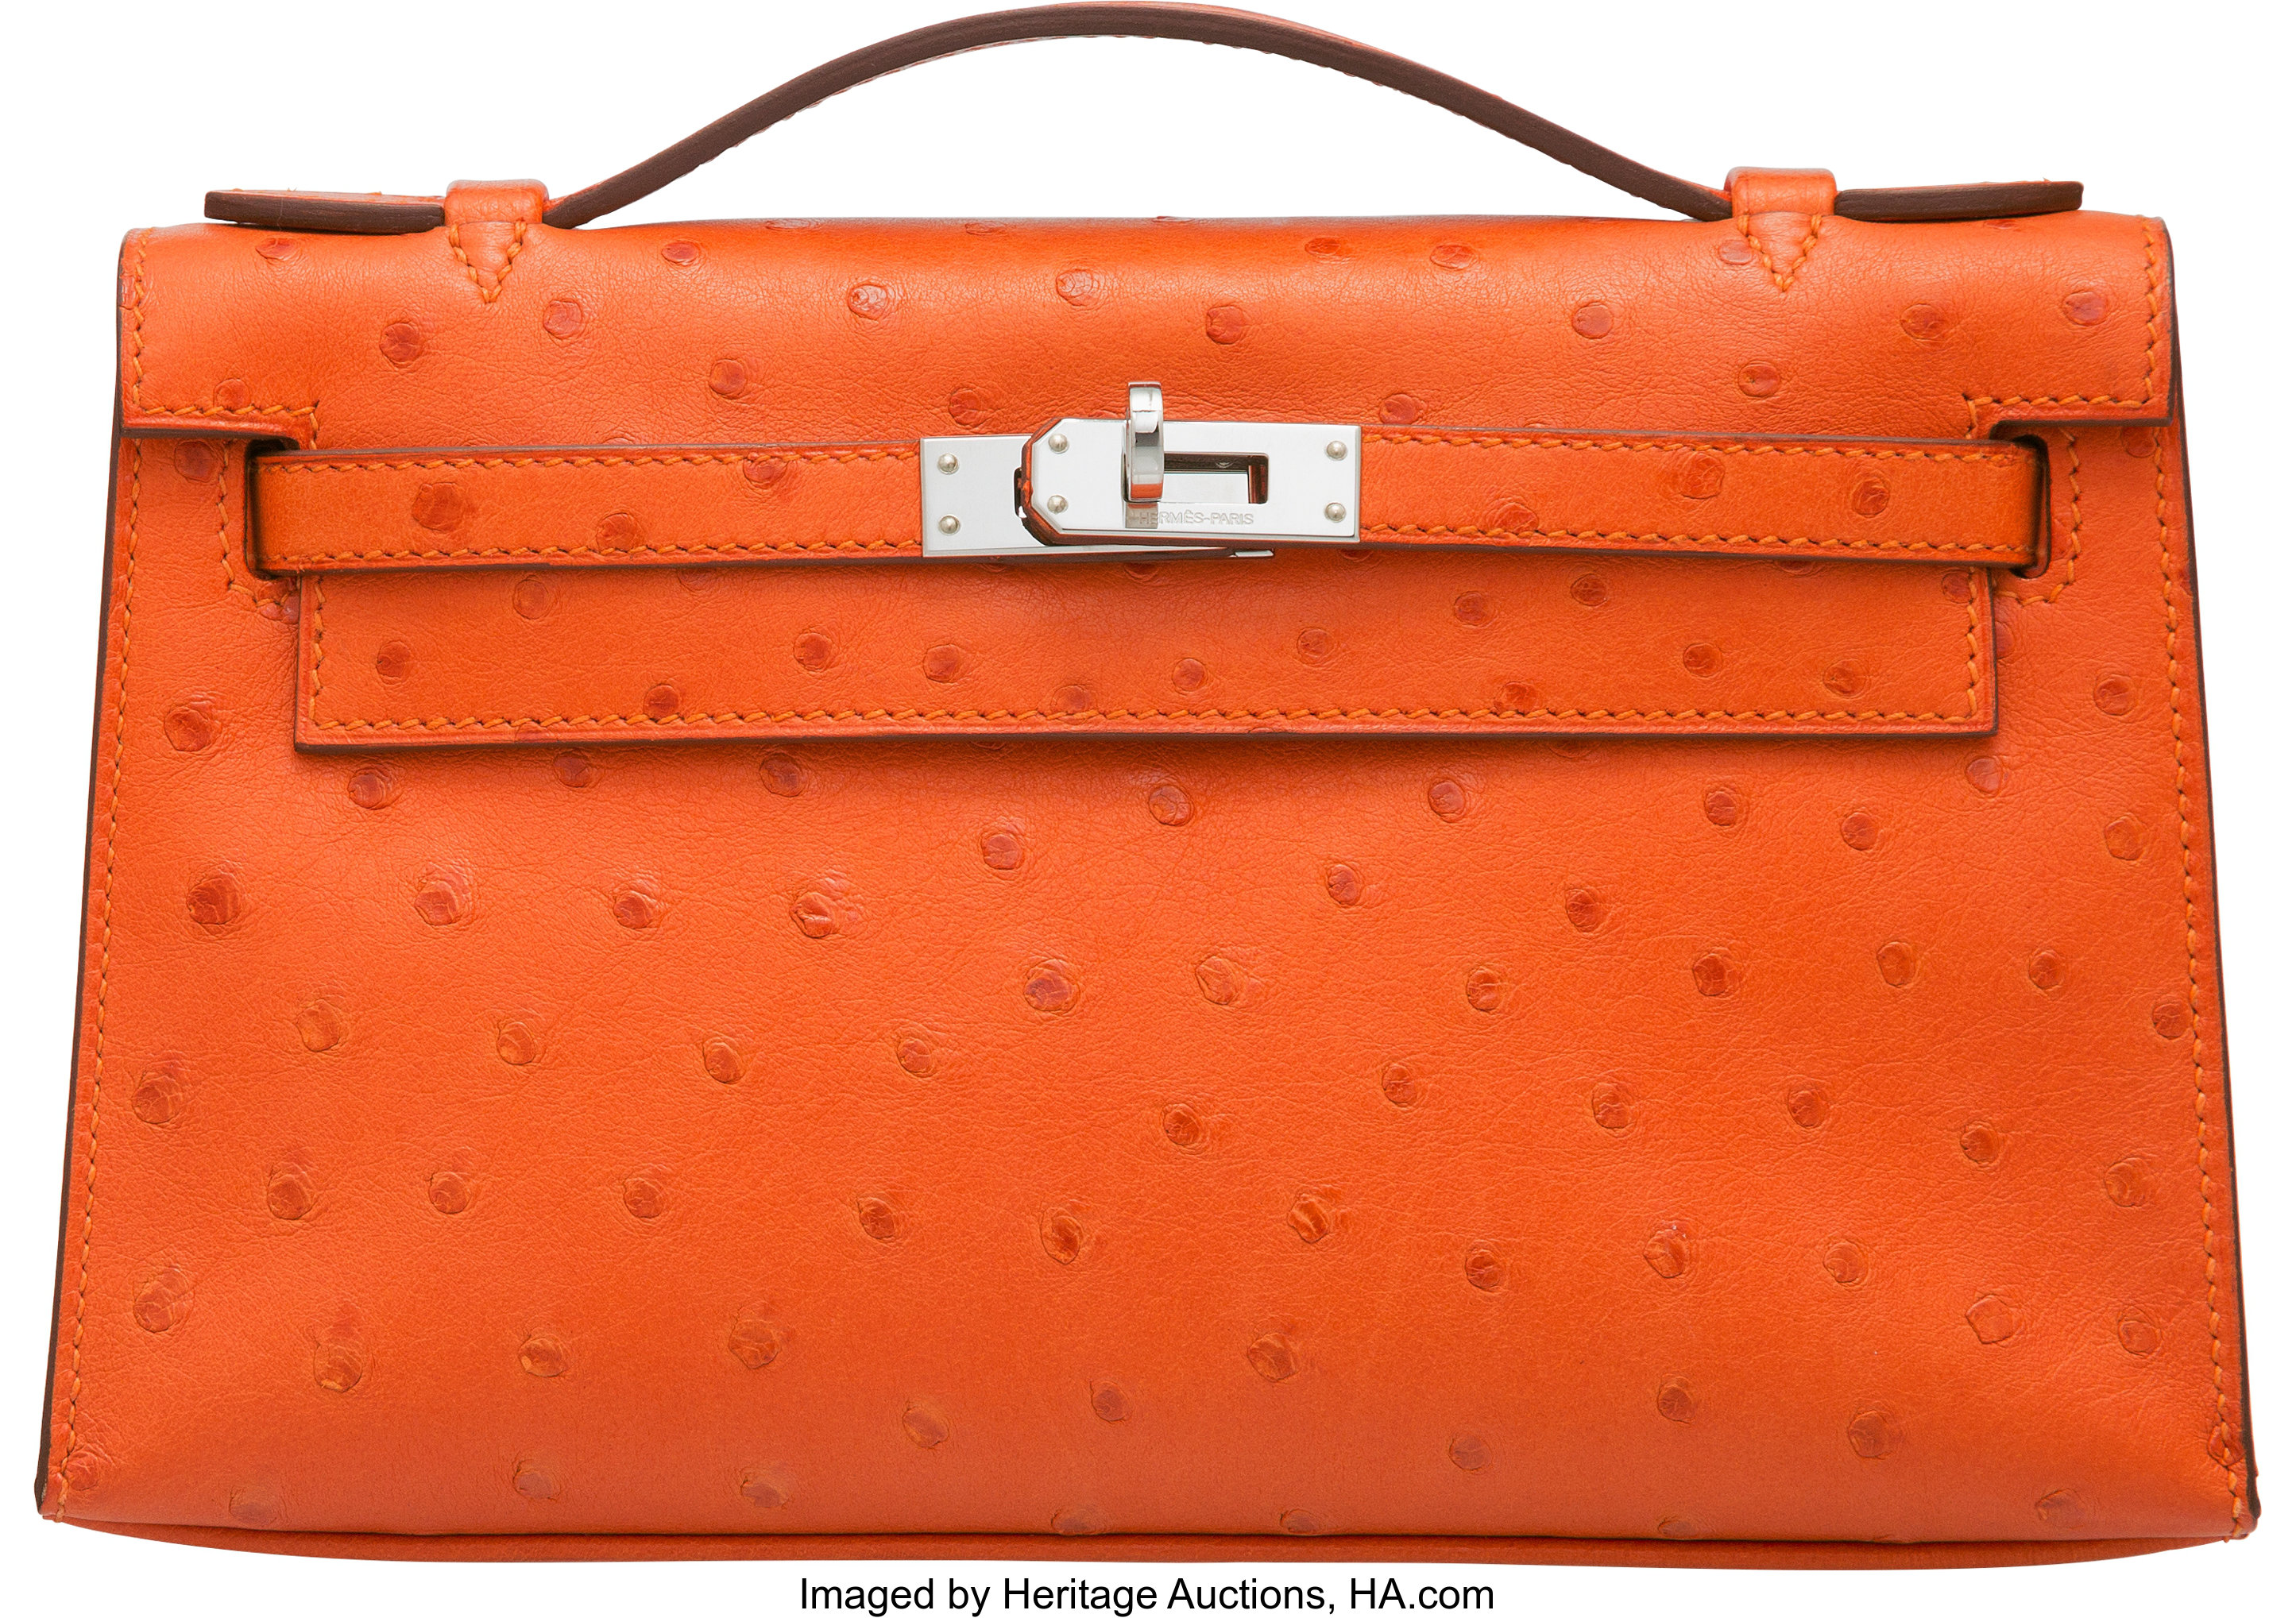 Hermes Tangerine Ostrich Kelly Pochette Bag with Gold Hardware. A